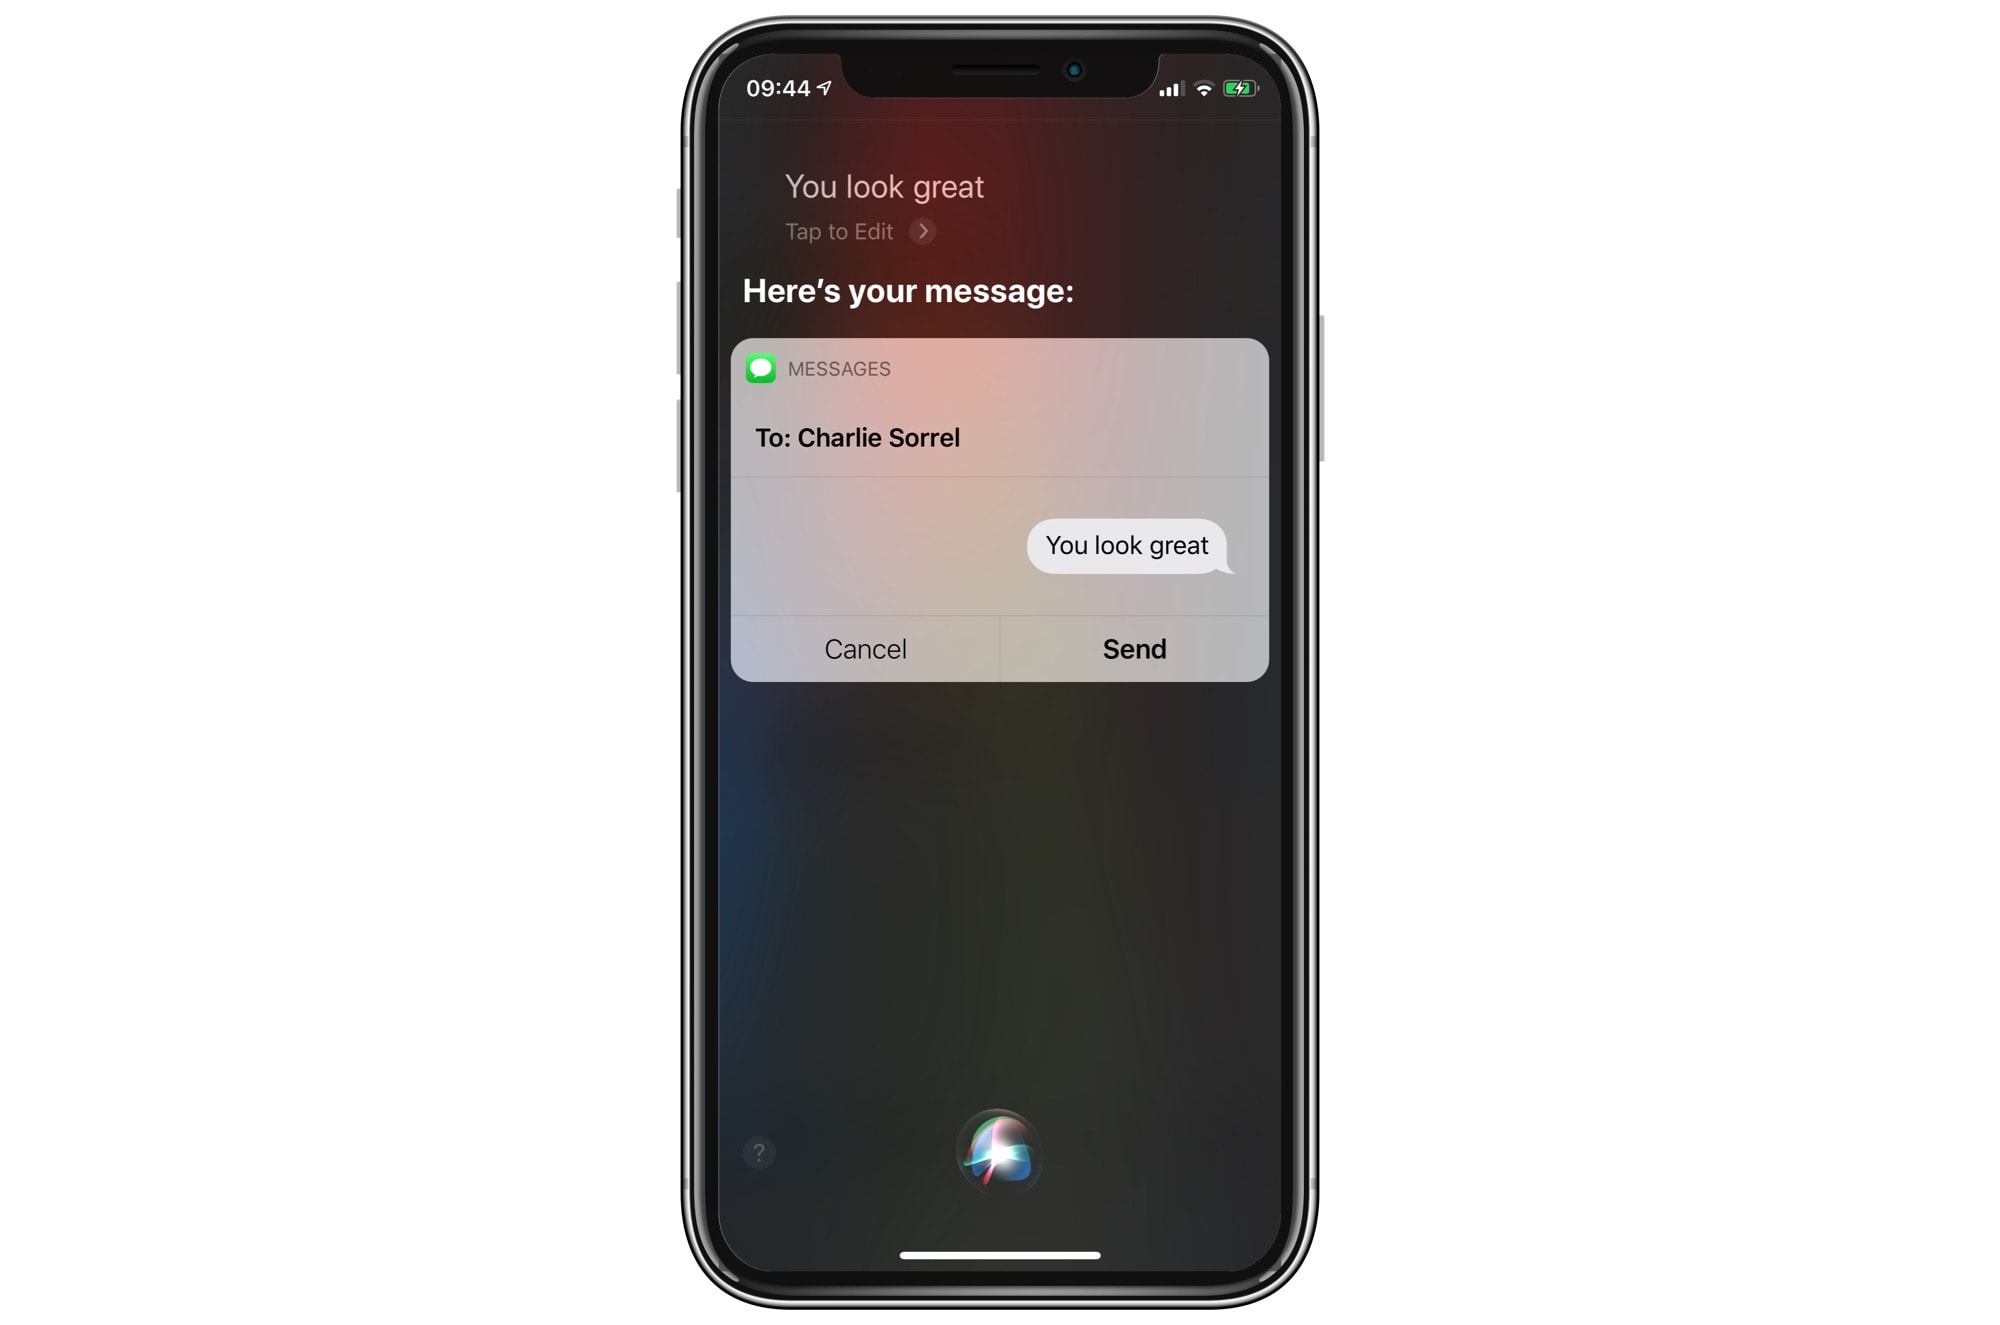   Send a message using Siri, from any old iPhone. 